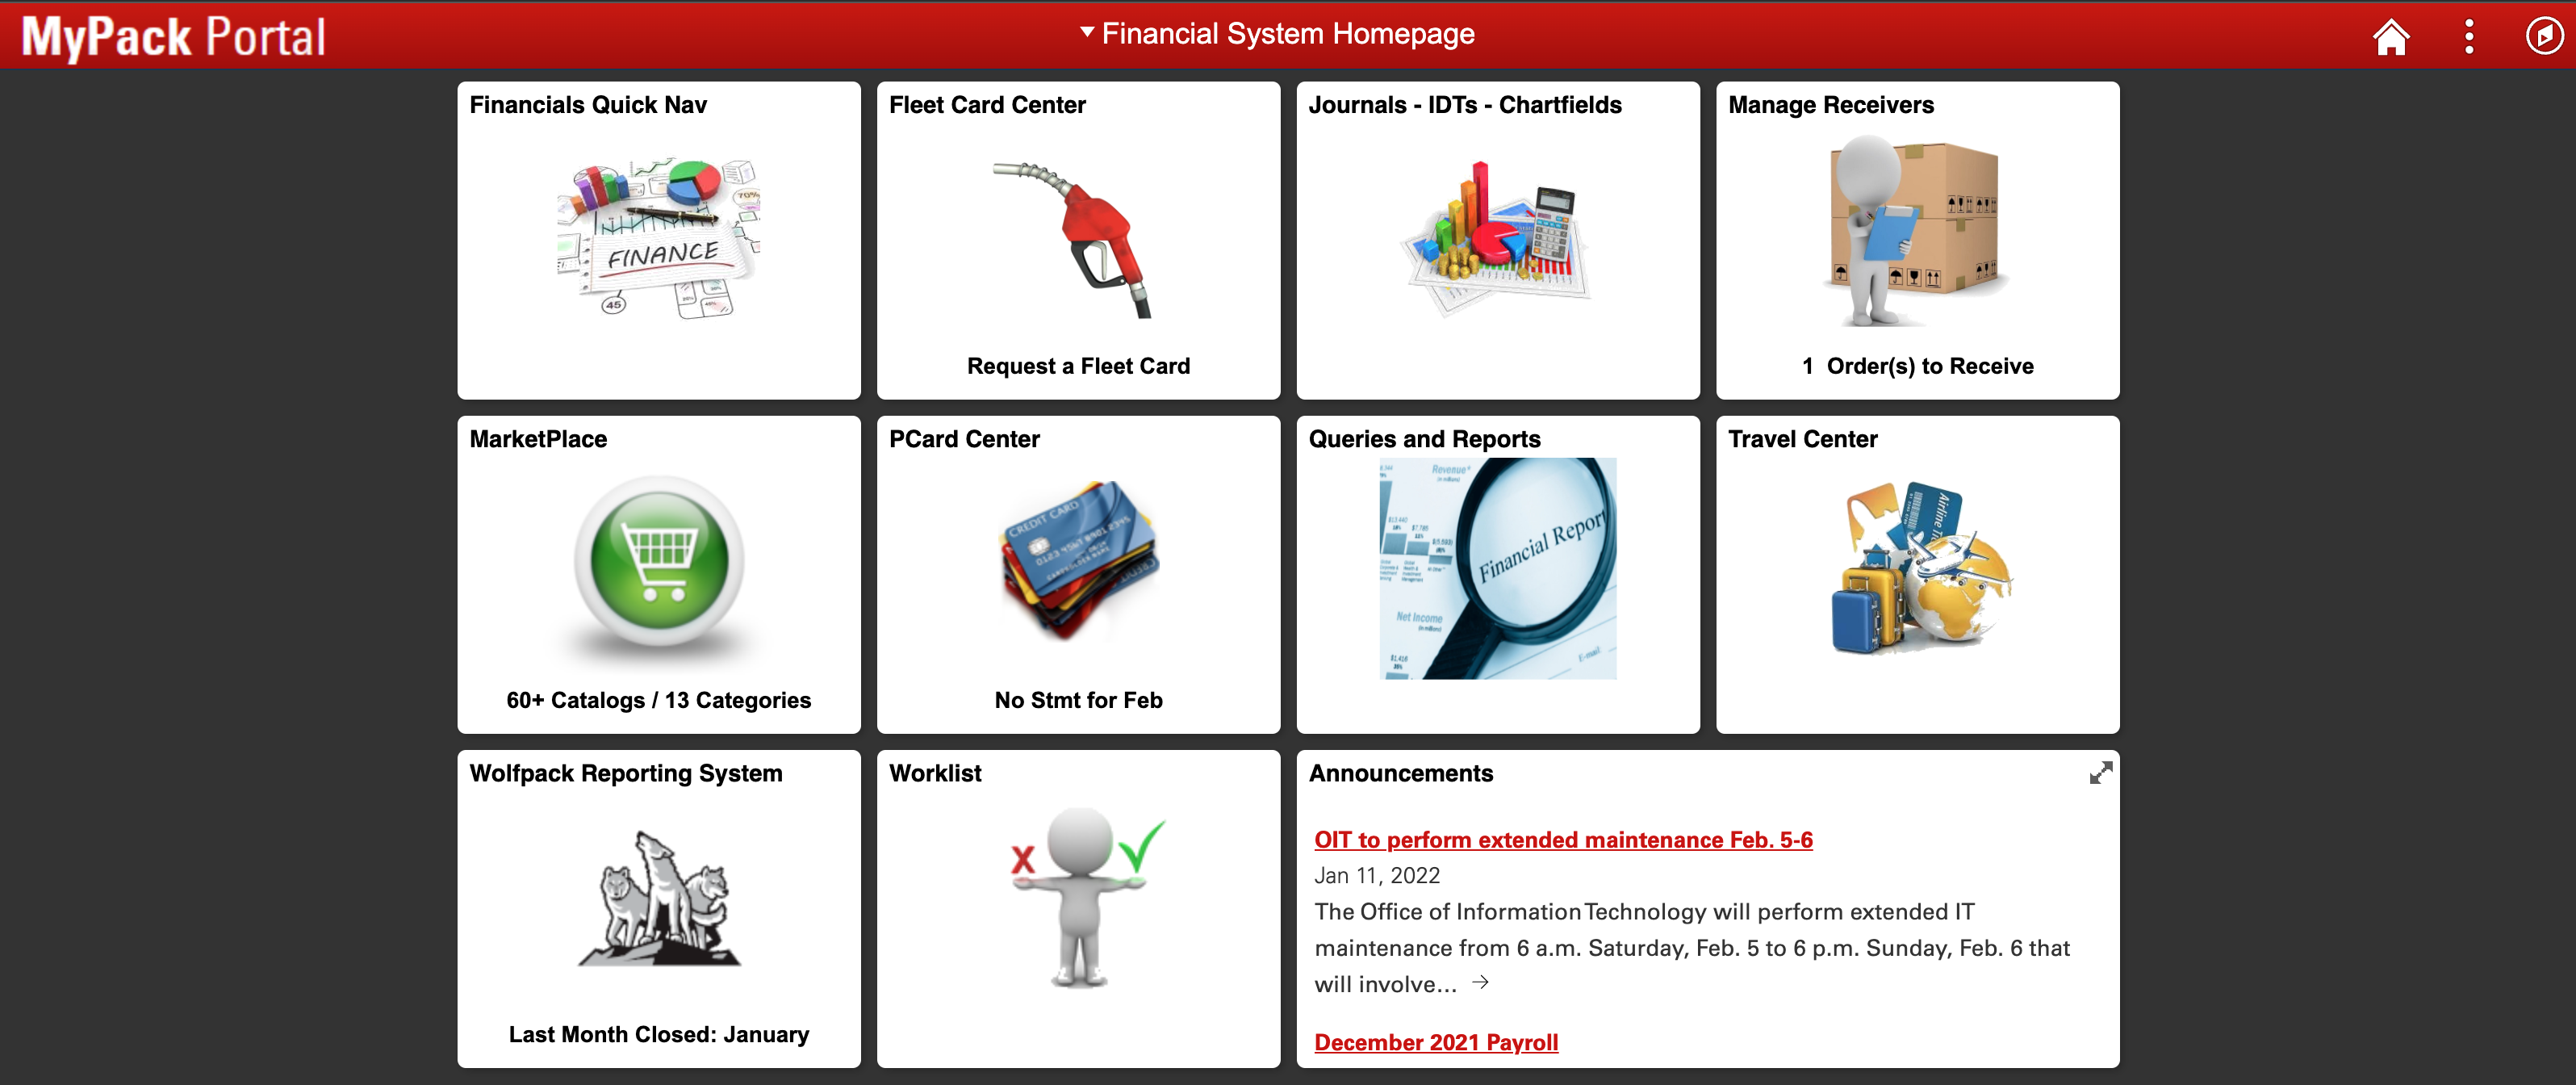 MyPackPortal Financial Systems Homepage